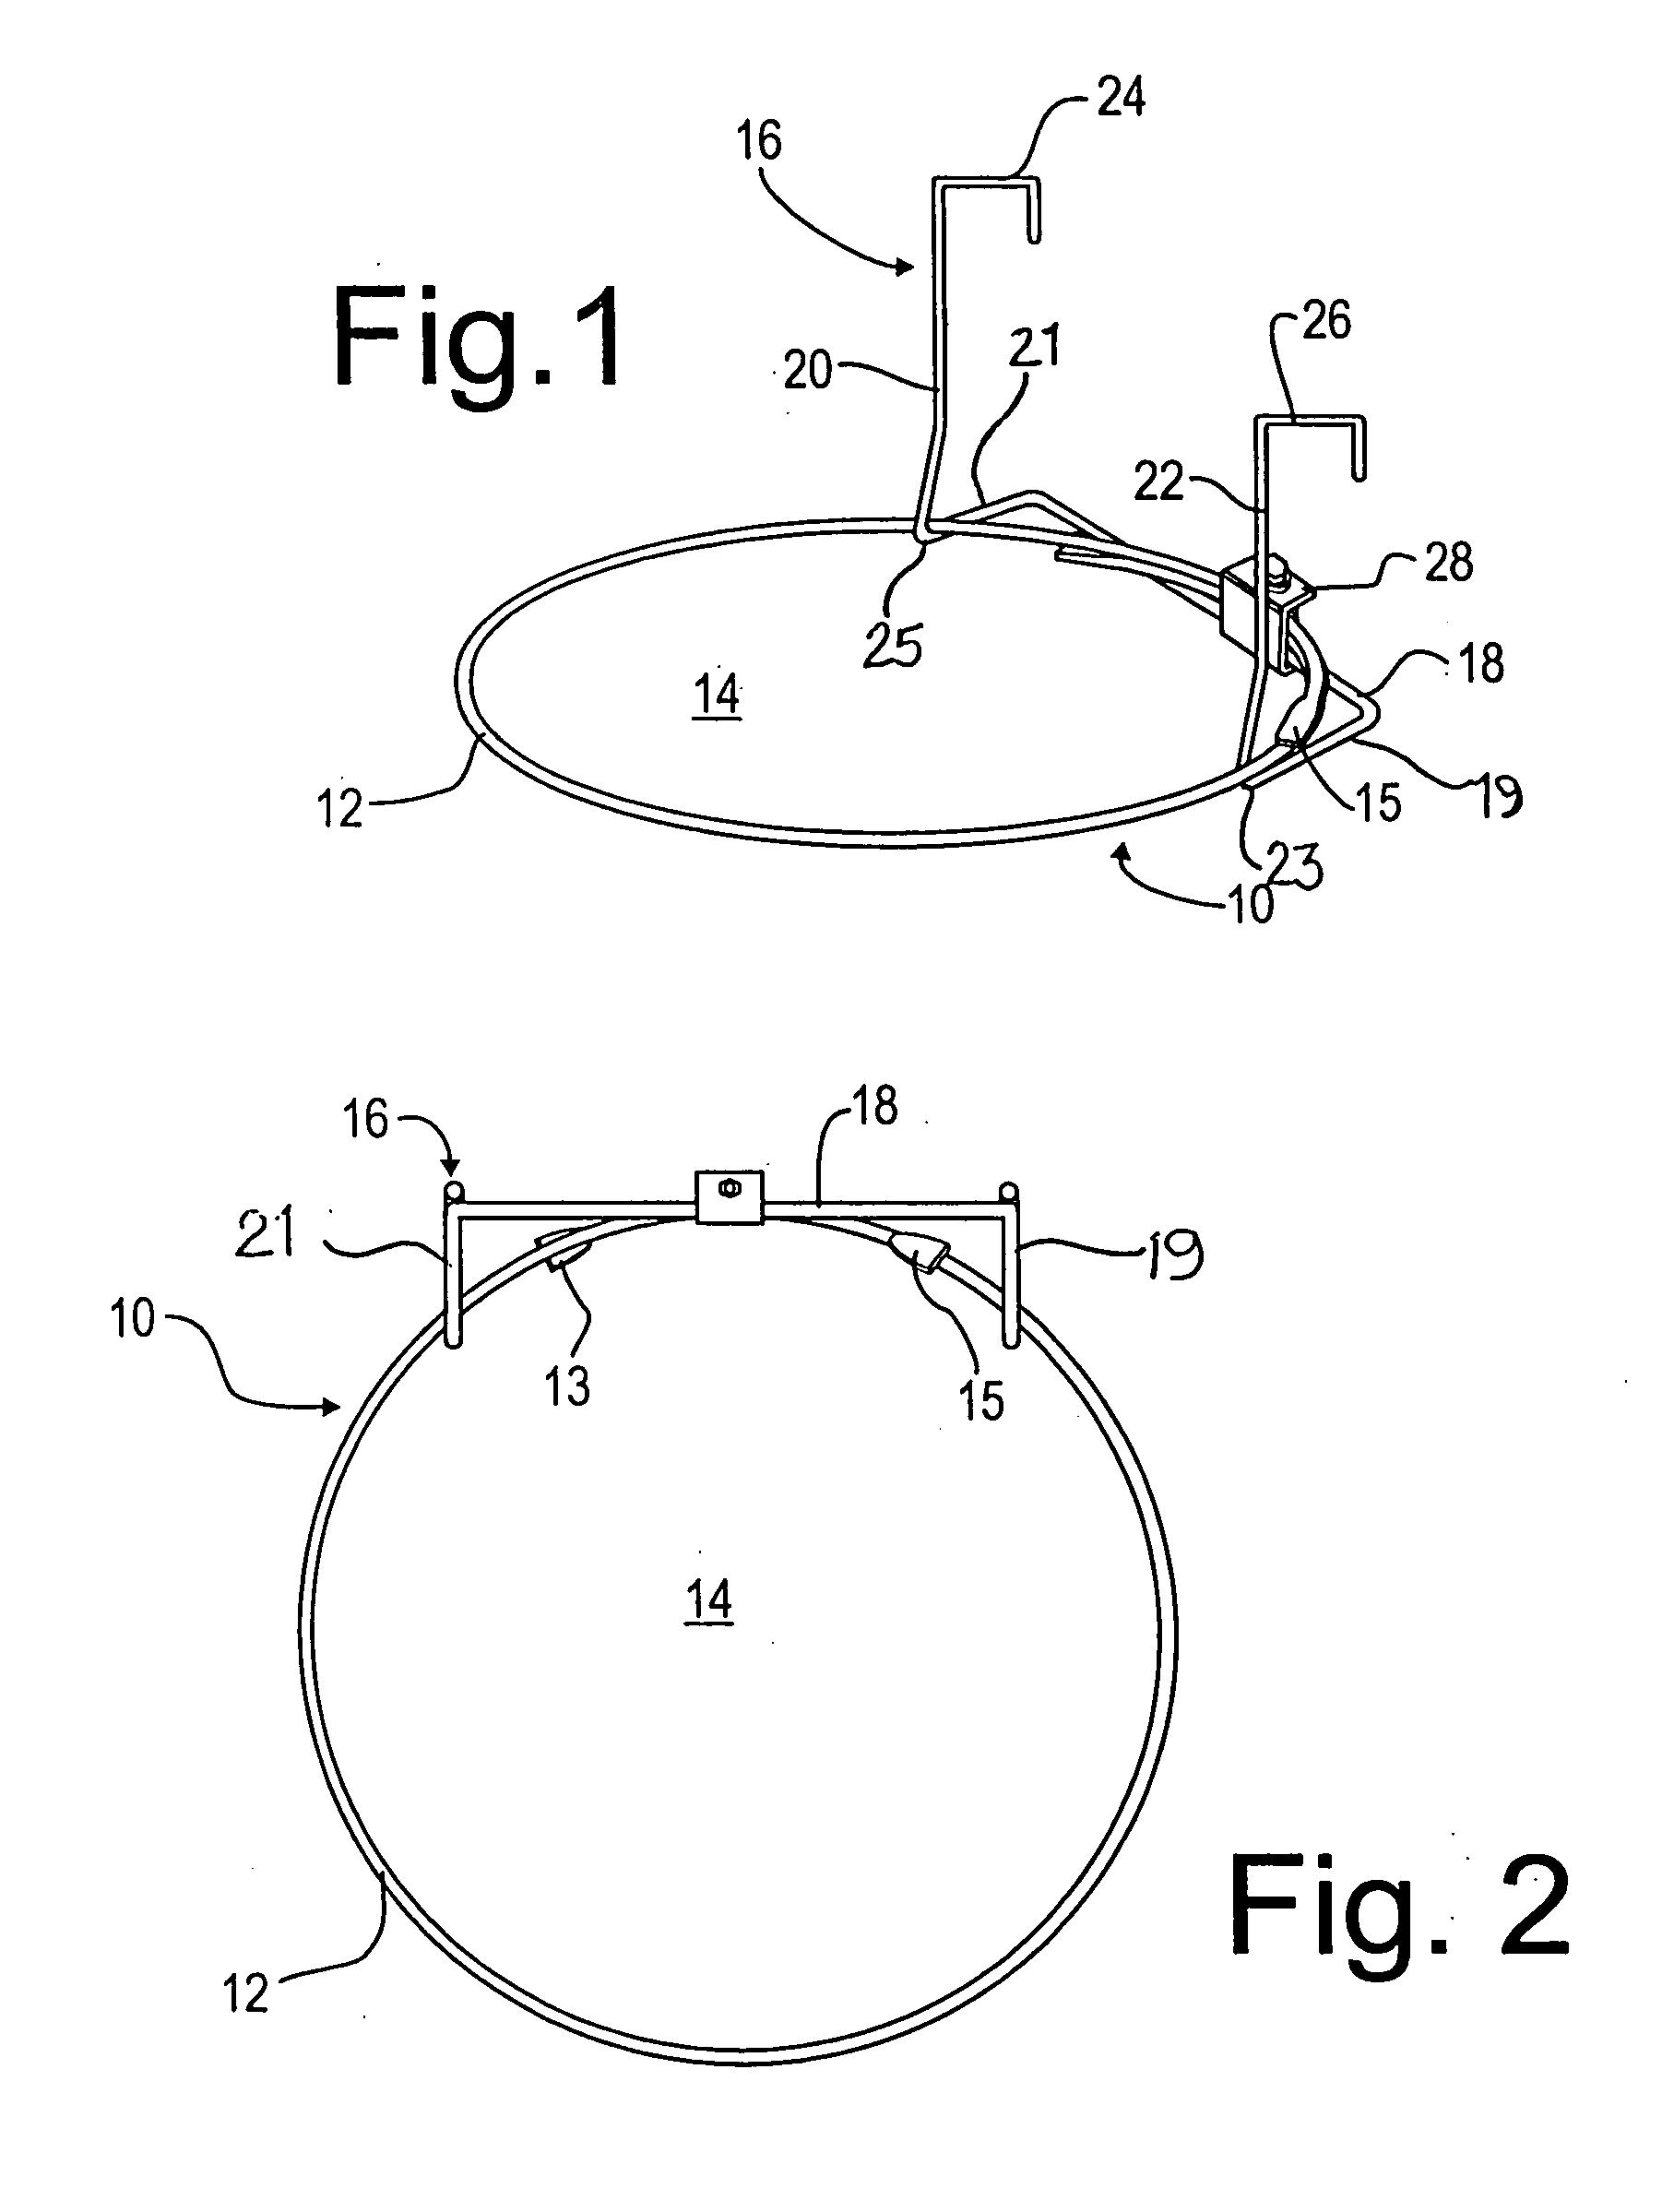 Receptacle support device for balcony or railing